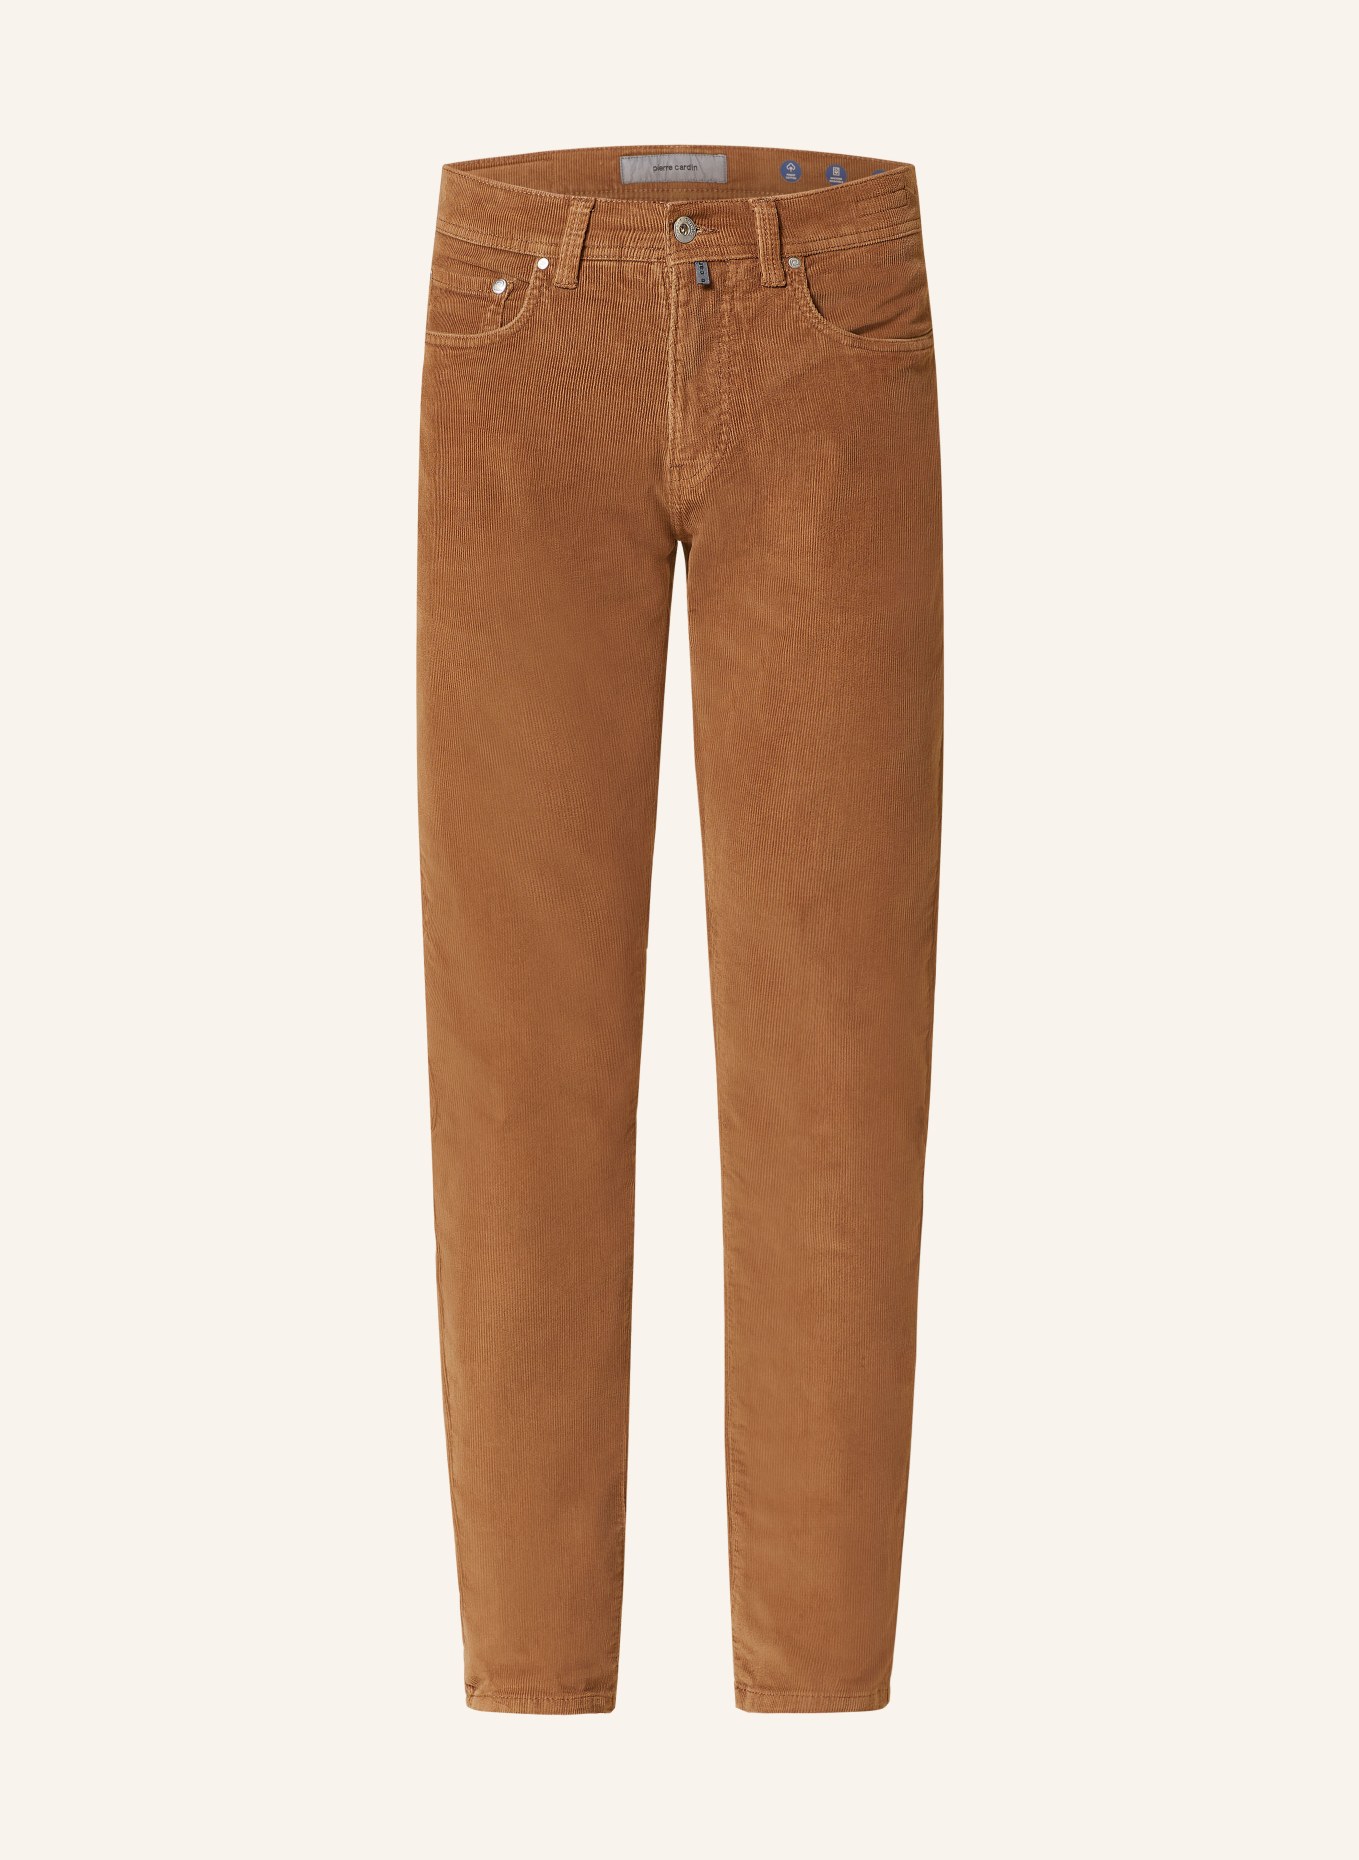 pierre cardin Corduroy trousers LYON tapered fit, Color: 8215 Chipmunk (Image 1)